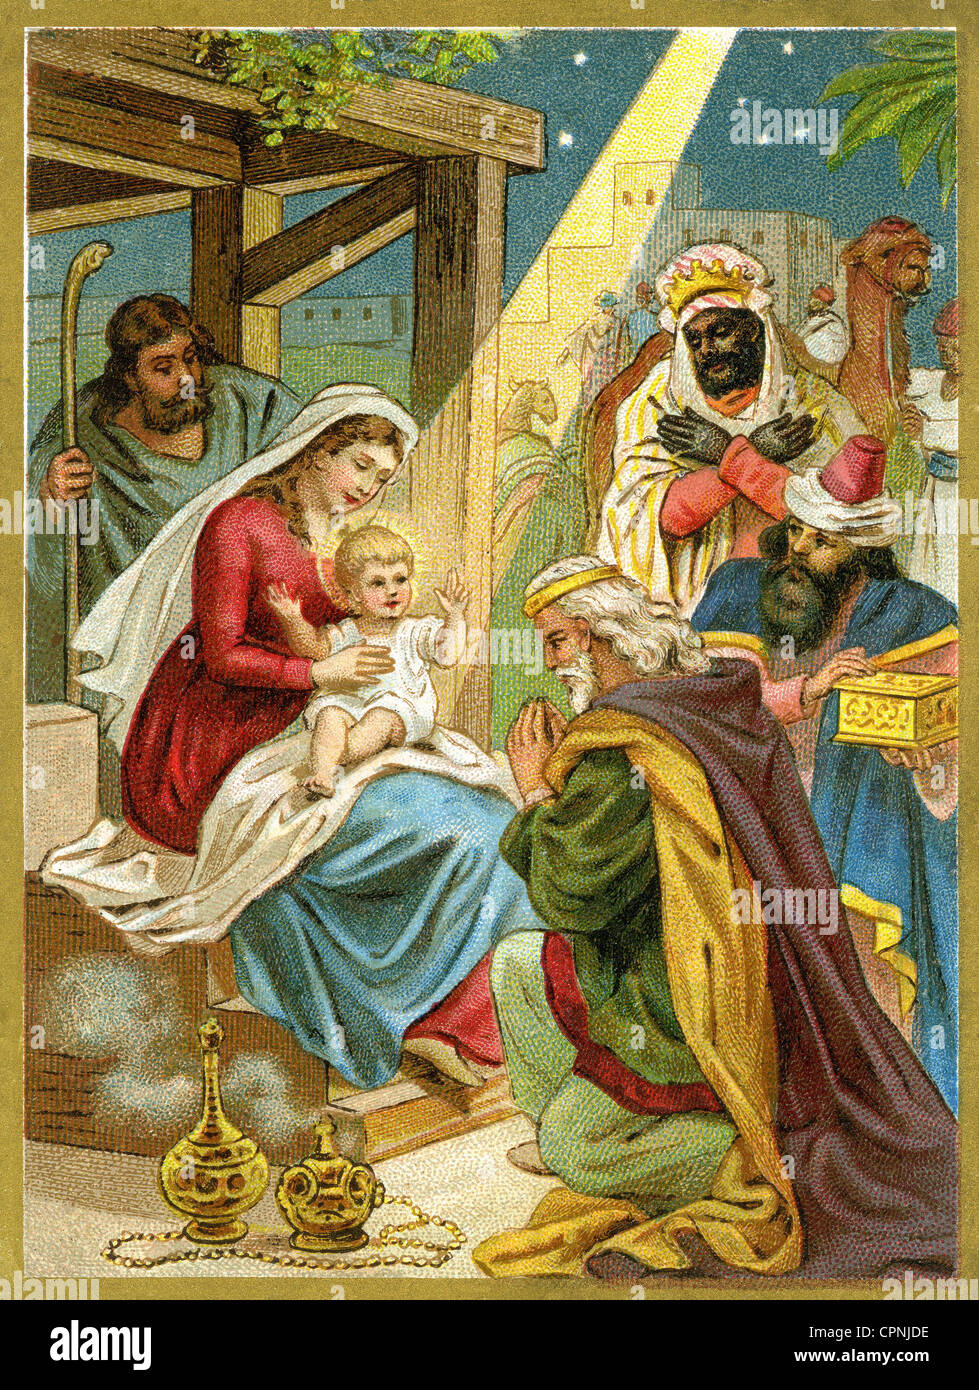 Christmas, Three Kings, the wise man from the Orient, bringing gift: gold, incense, myrrh, lithograph, Germany, circa 1898, Additional-Rights-Clearences-Not Available Stock Photo